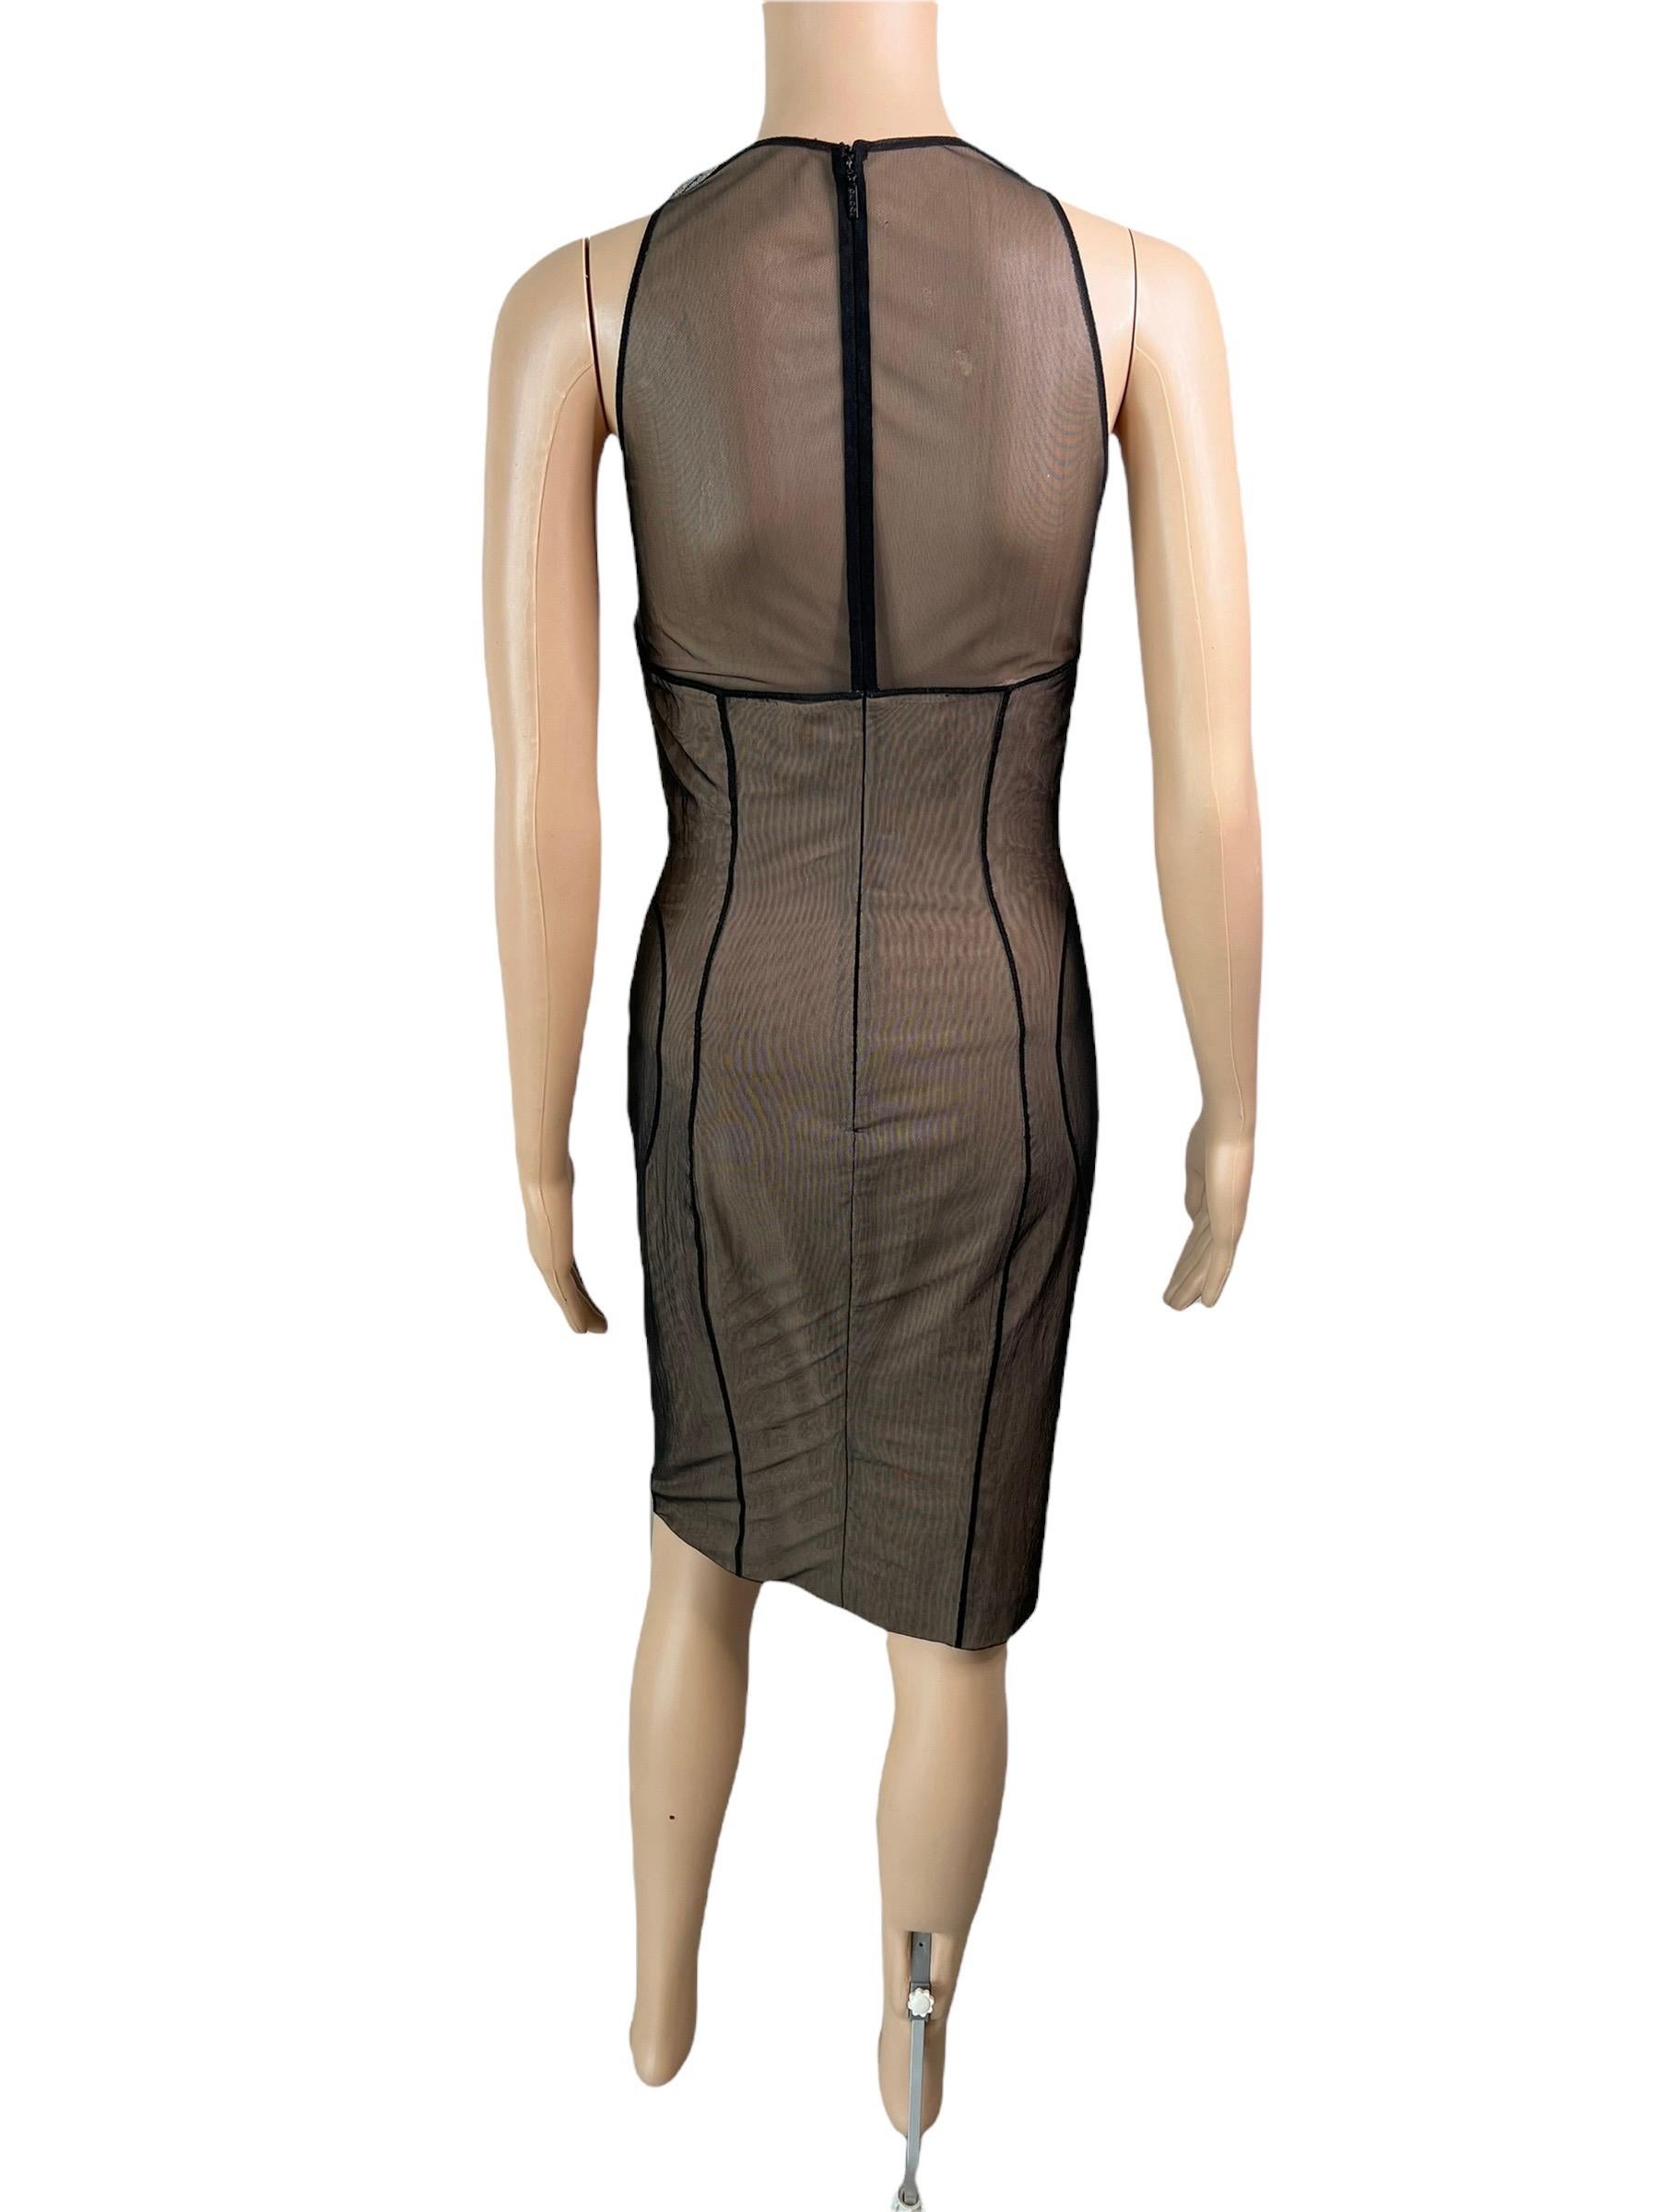 Black Gucci by Tom Ford S/S 2001 Runway Sheer Tulle Mesh Bustier Corset Midi Dress For Sale